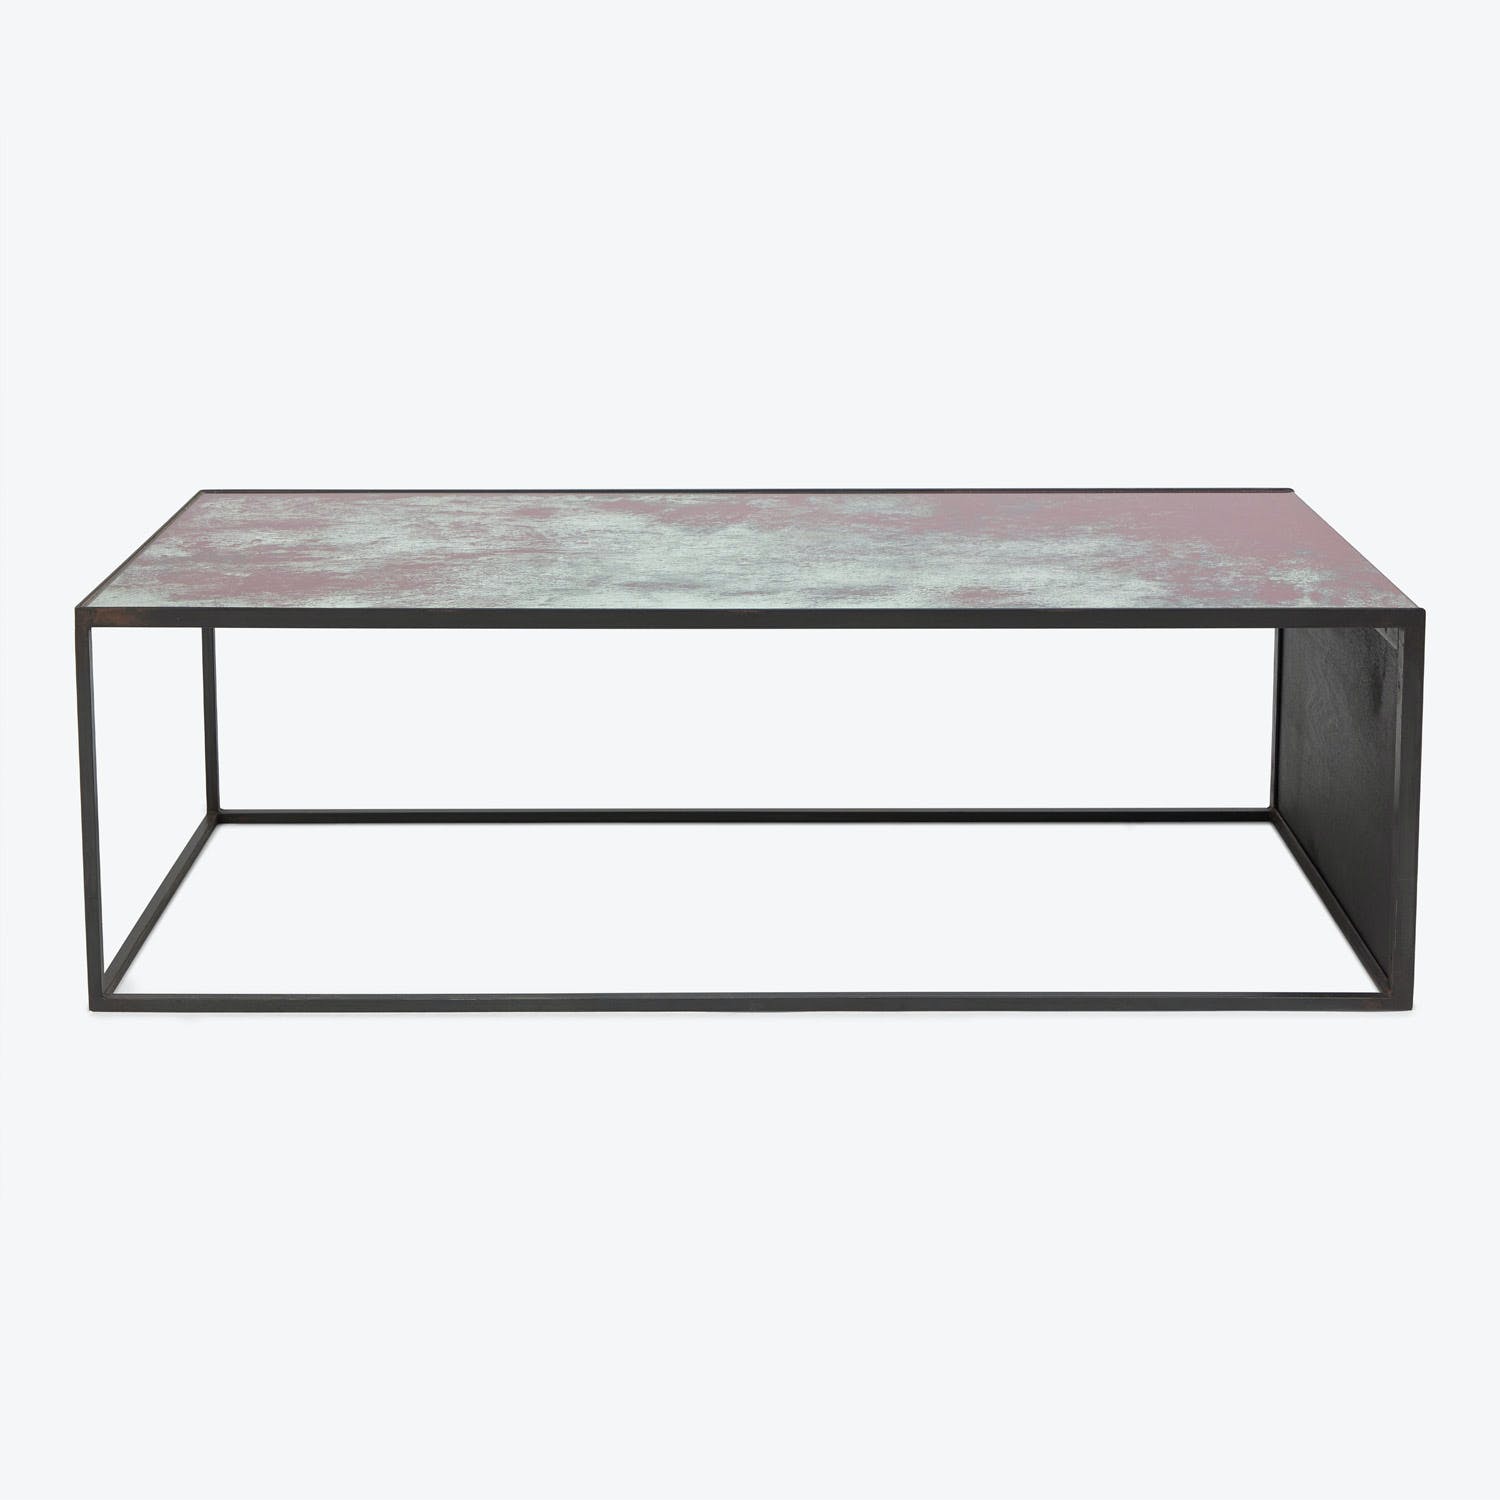 Minimalist rectangular coffee table with textured pink-gray tabletop and black frame.